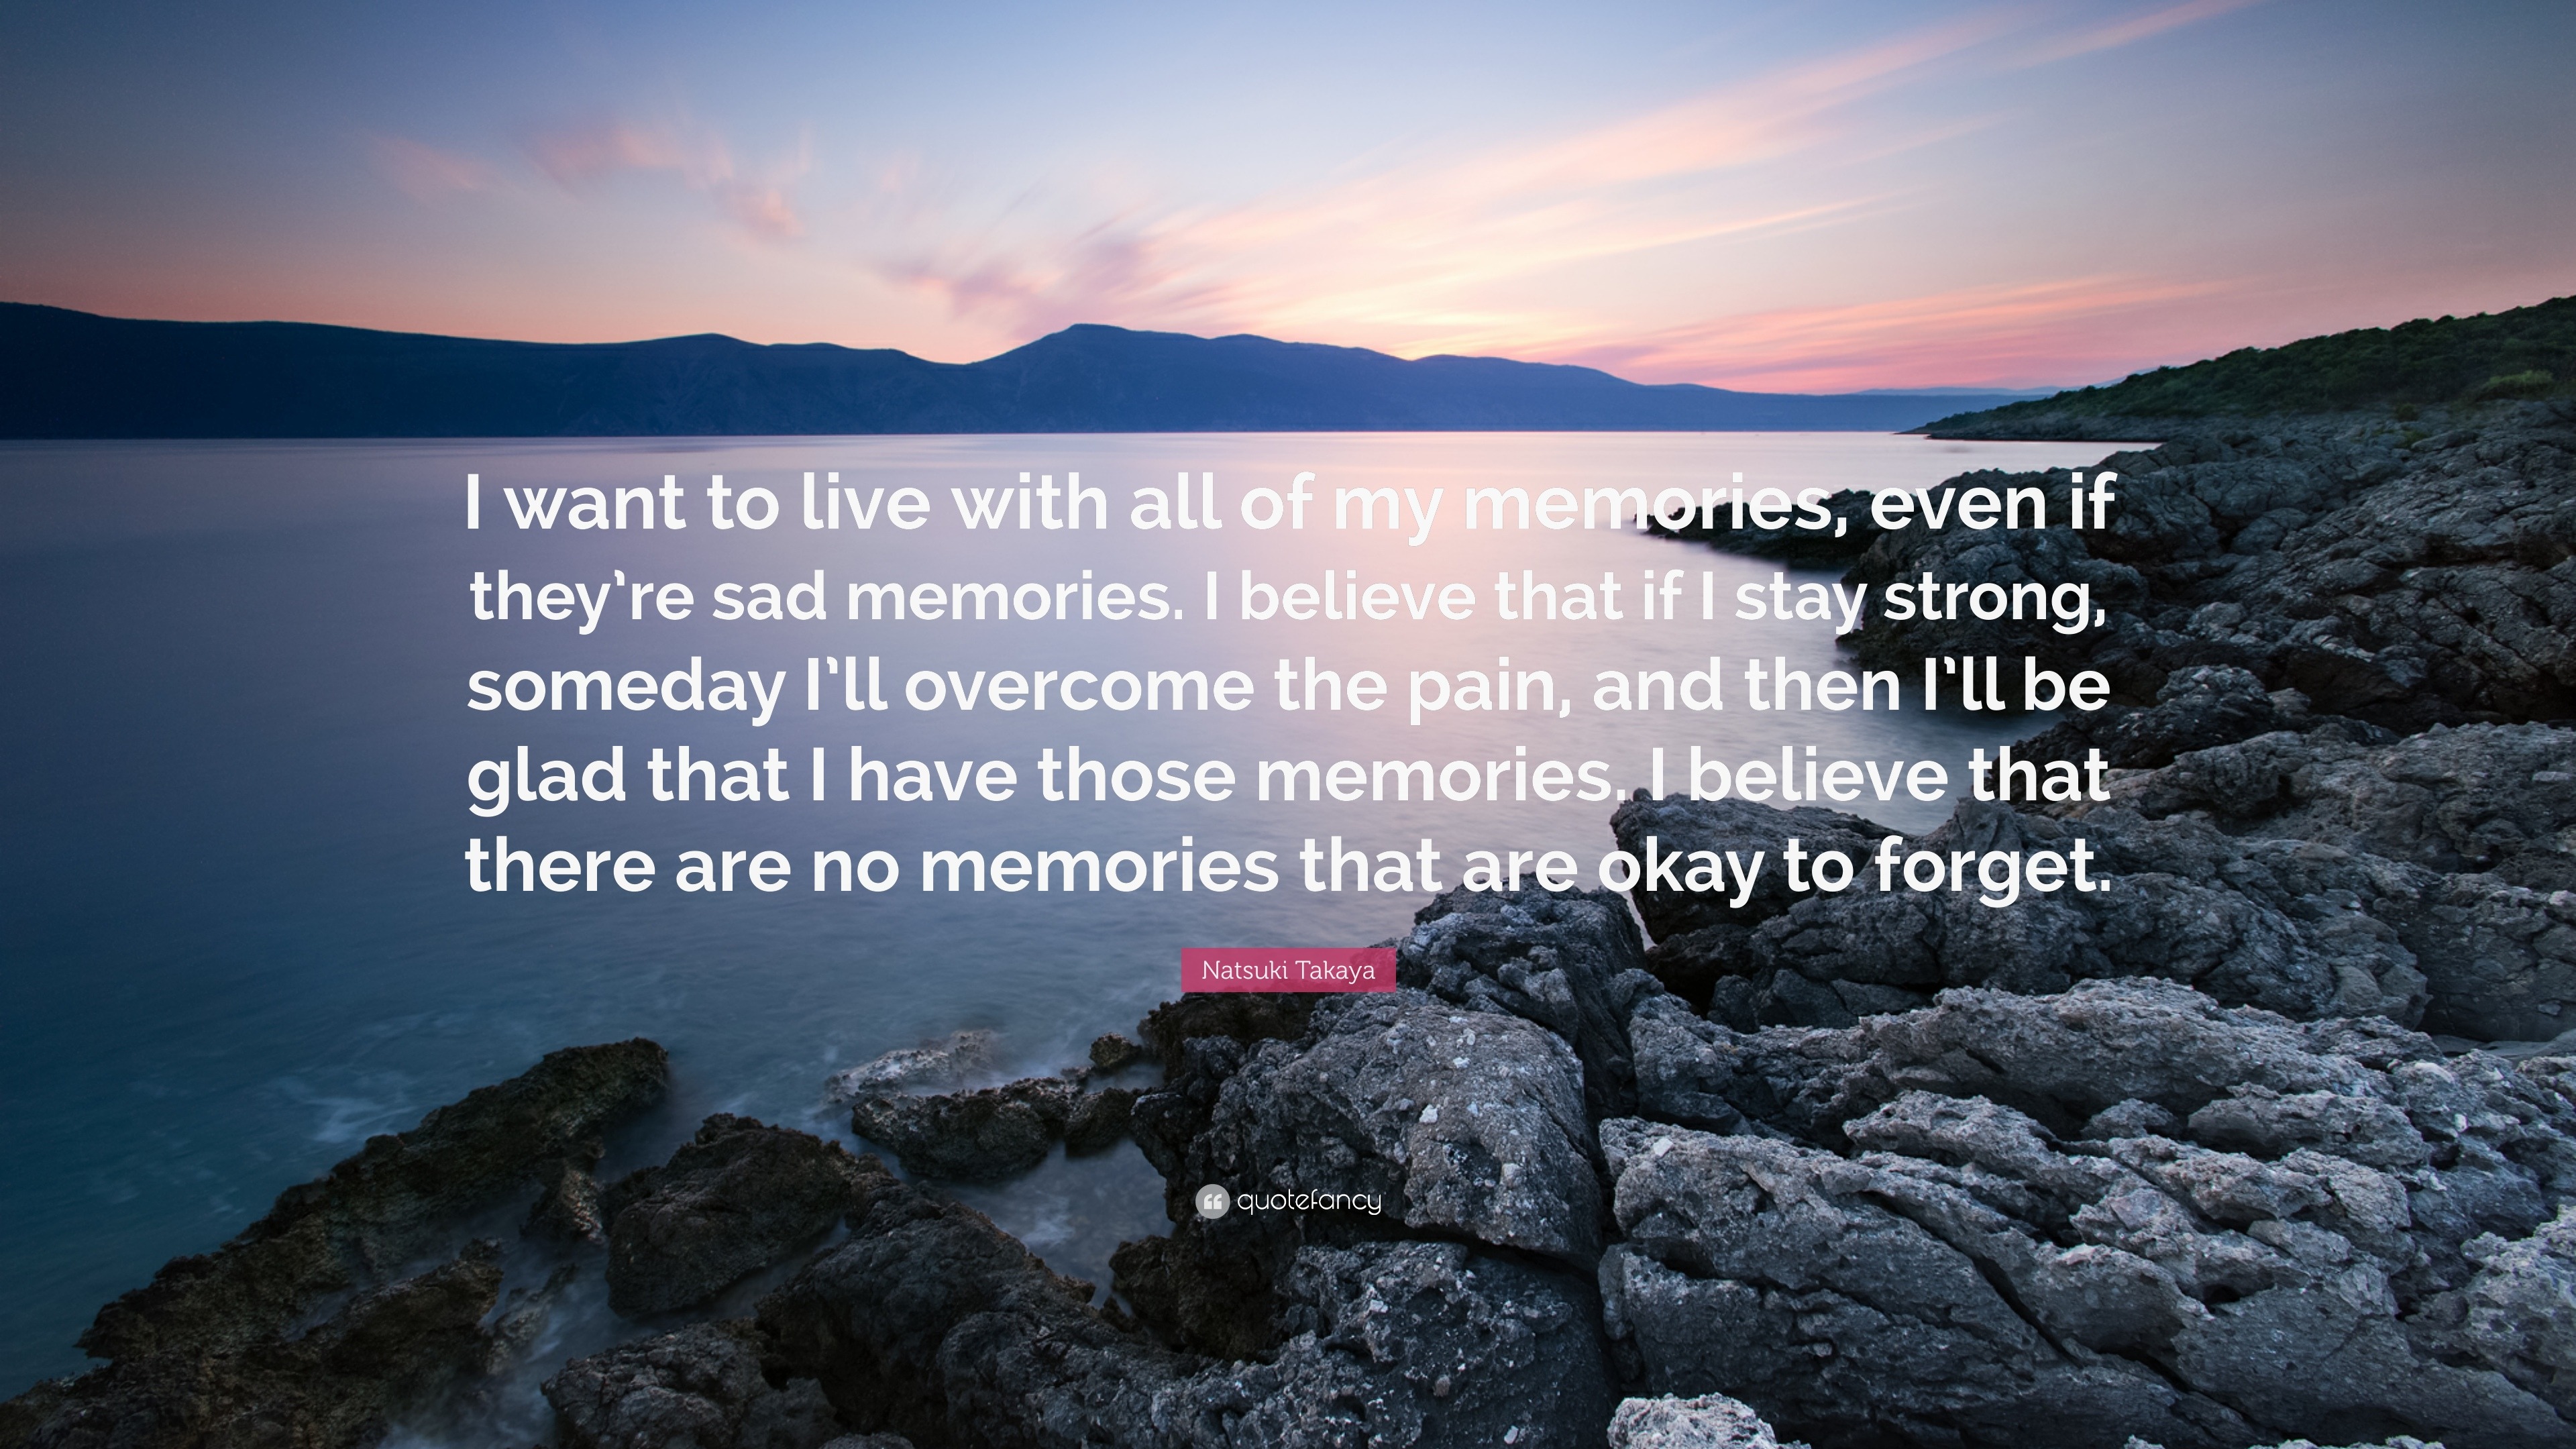 Natsuki Takaya Quote: “I want to live with all of my memories, even if ...